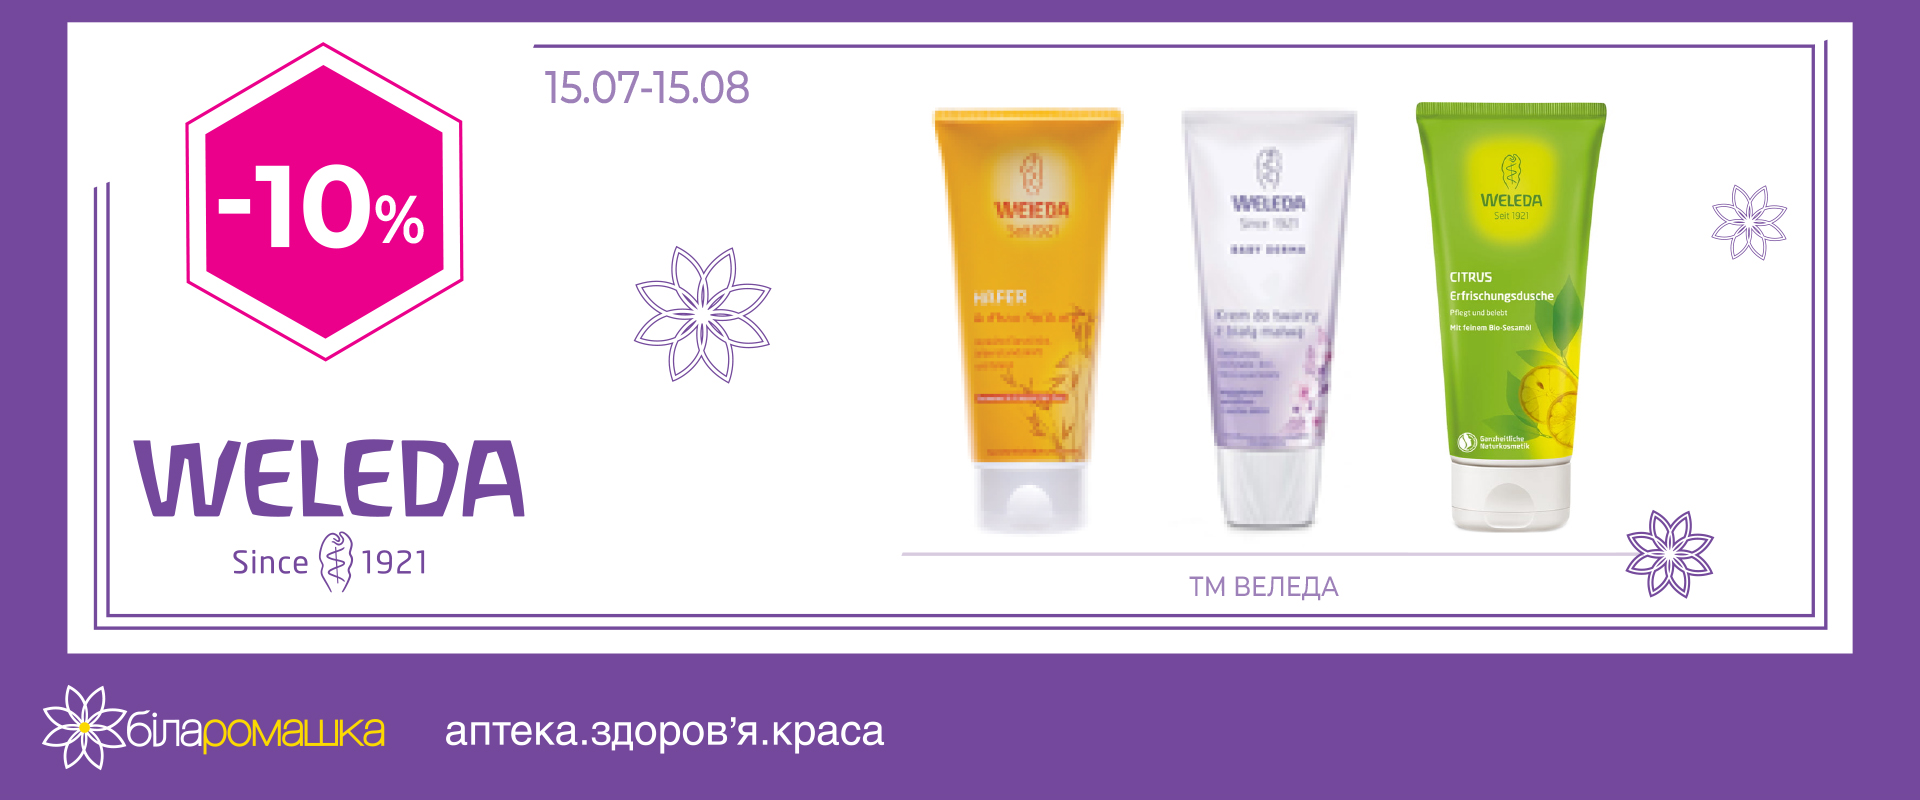 -10% discount on WELEDA TM products